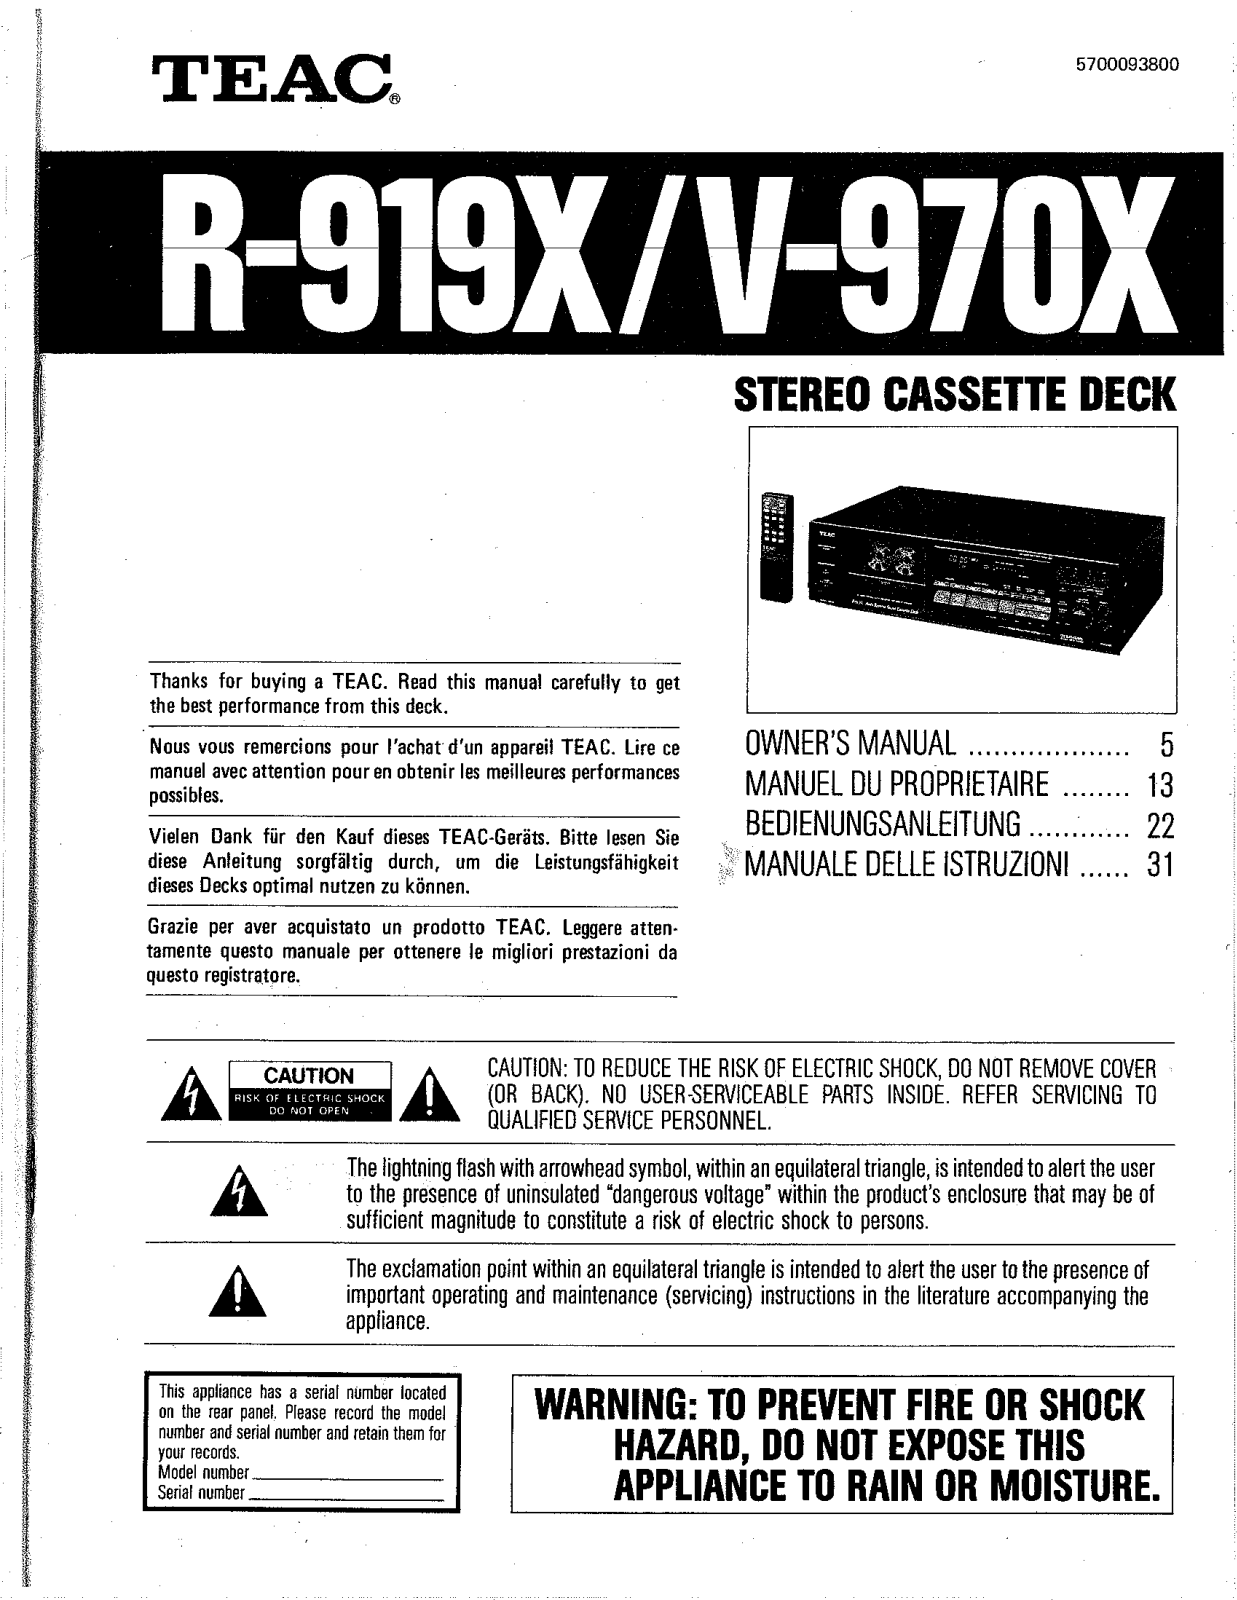 TEAC R-919-X Owners manual